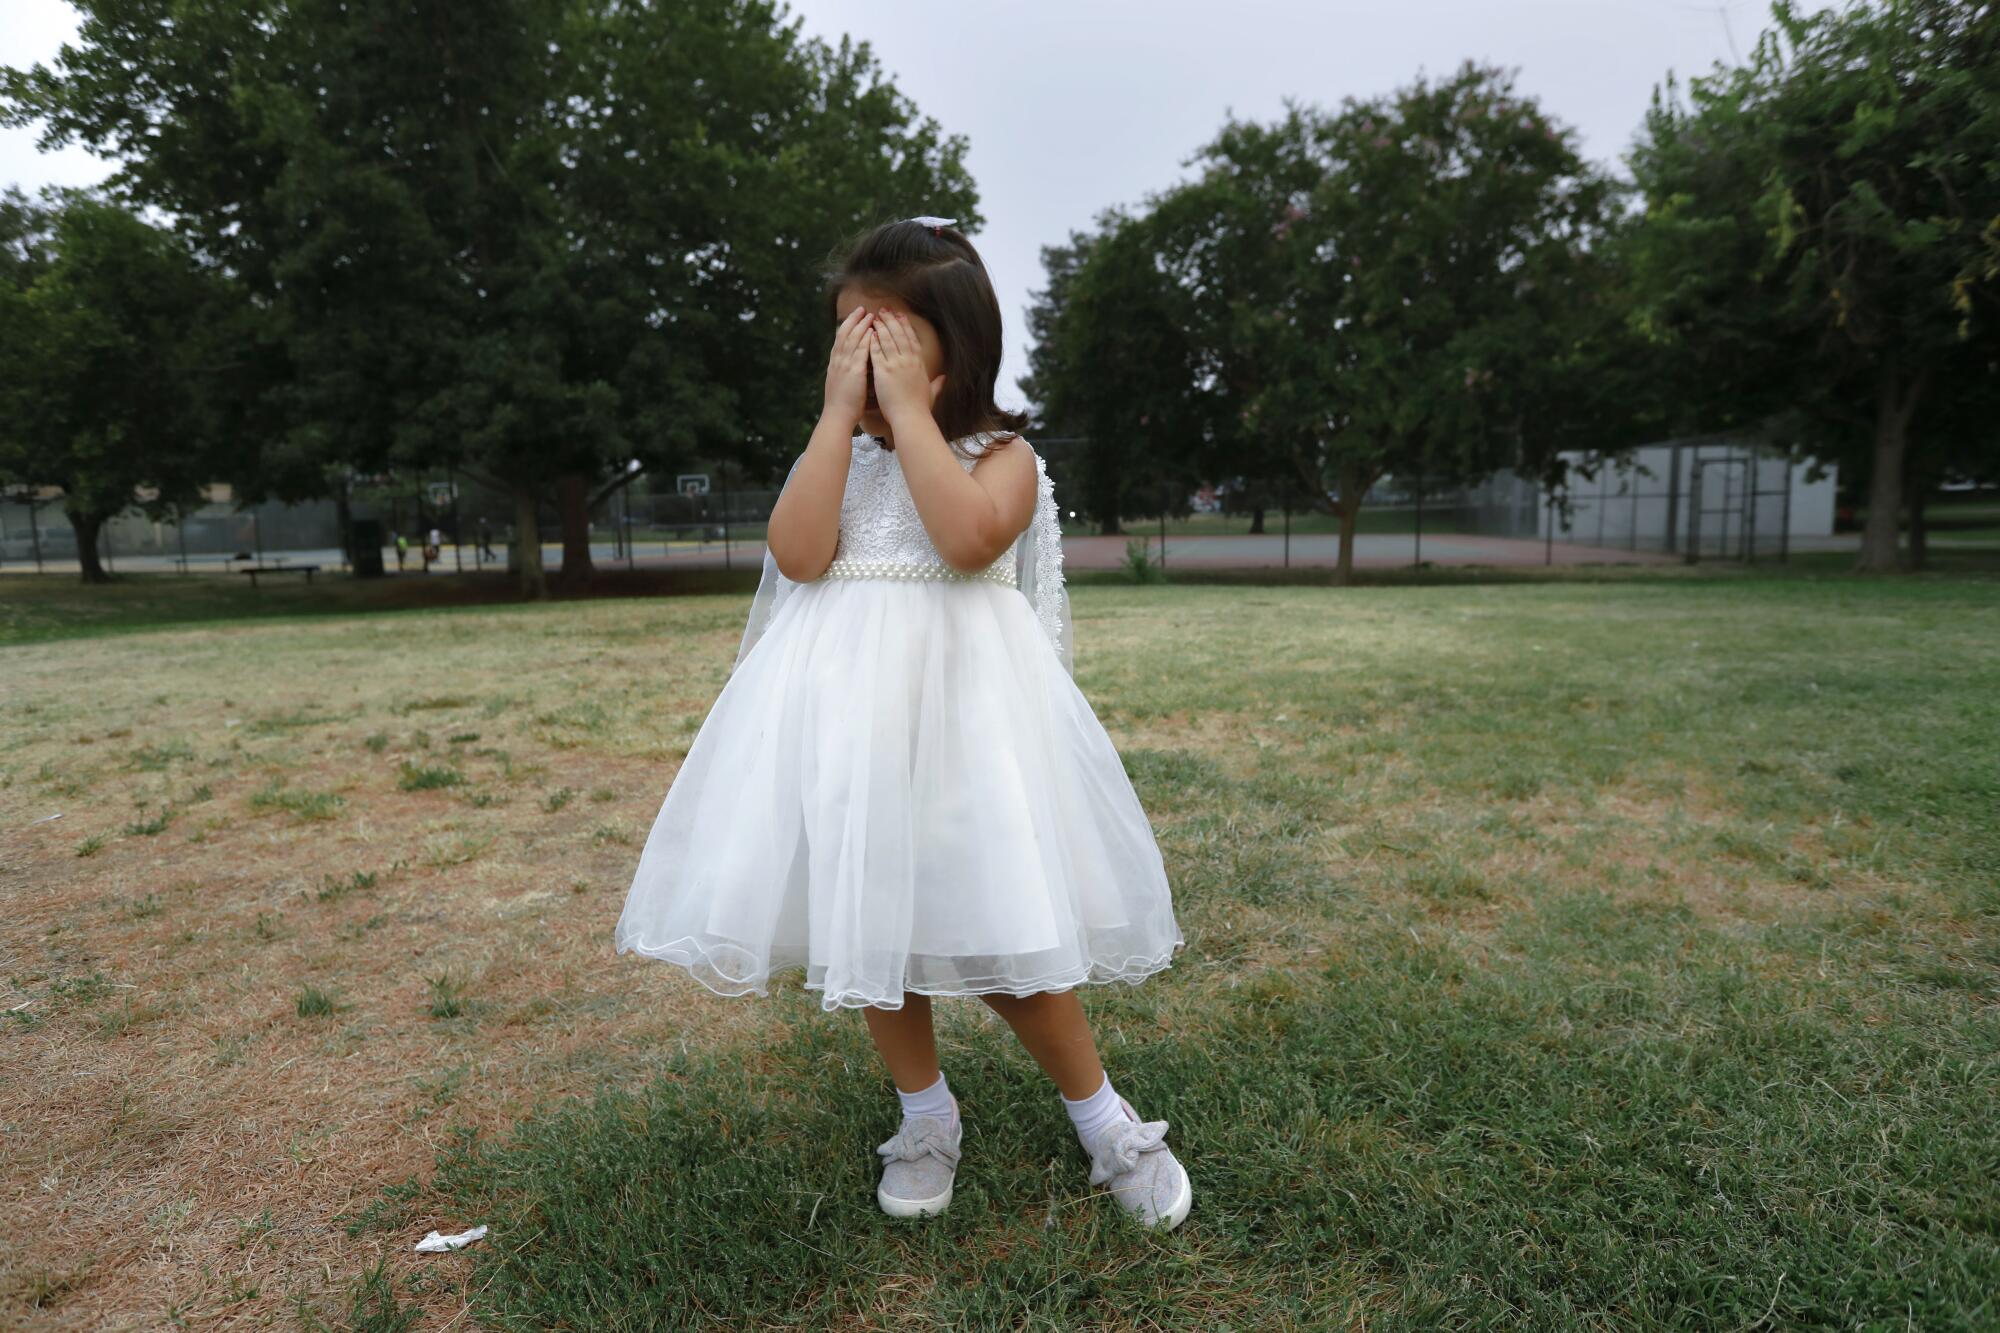 A girl in a white dress covers her eyes while playing hide-and-seek with other children at a park.